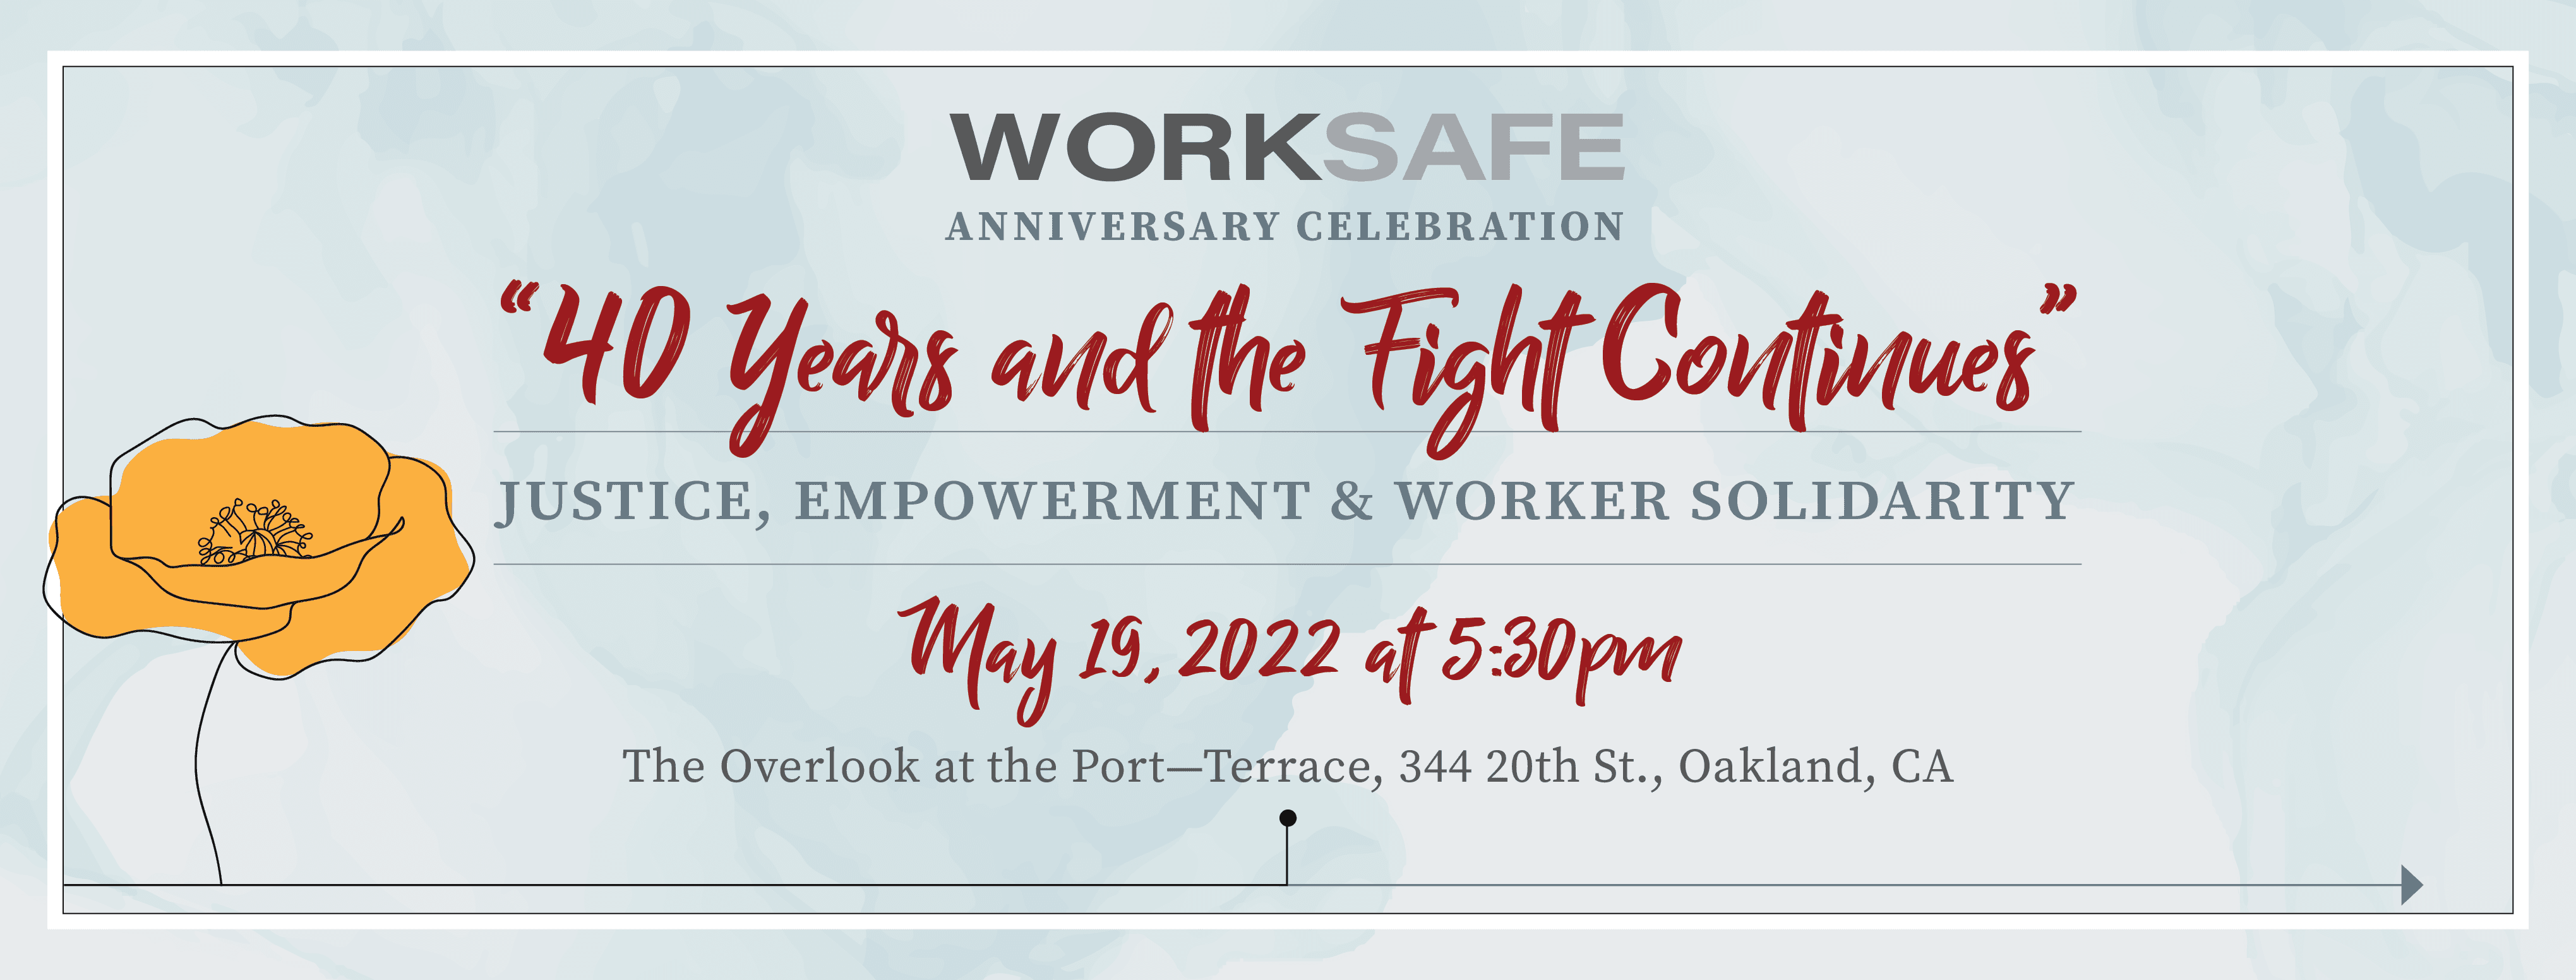 May 19, 2022 - Worksafe's 40th Anniversary Event